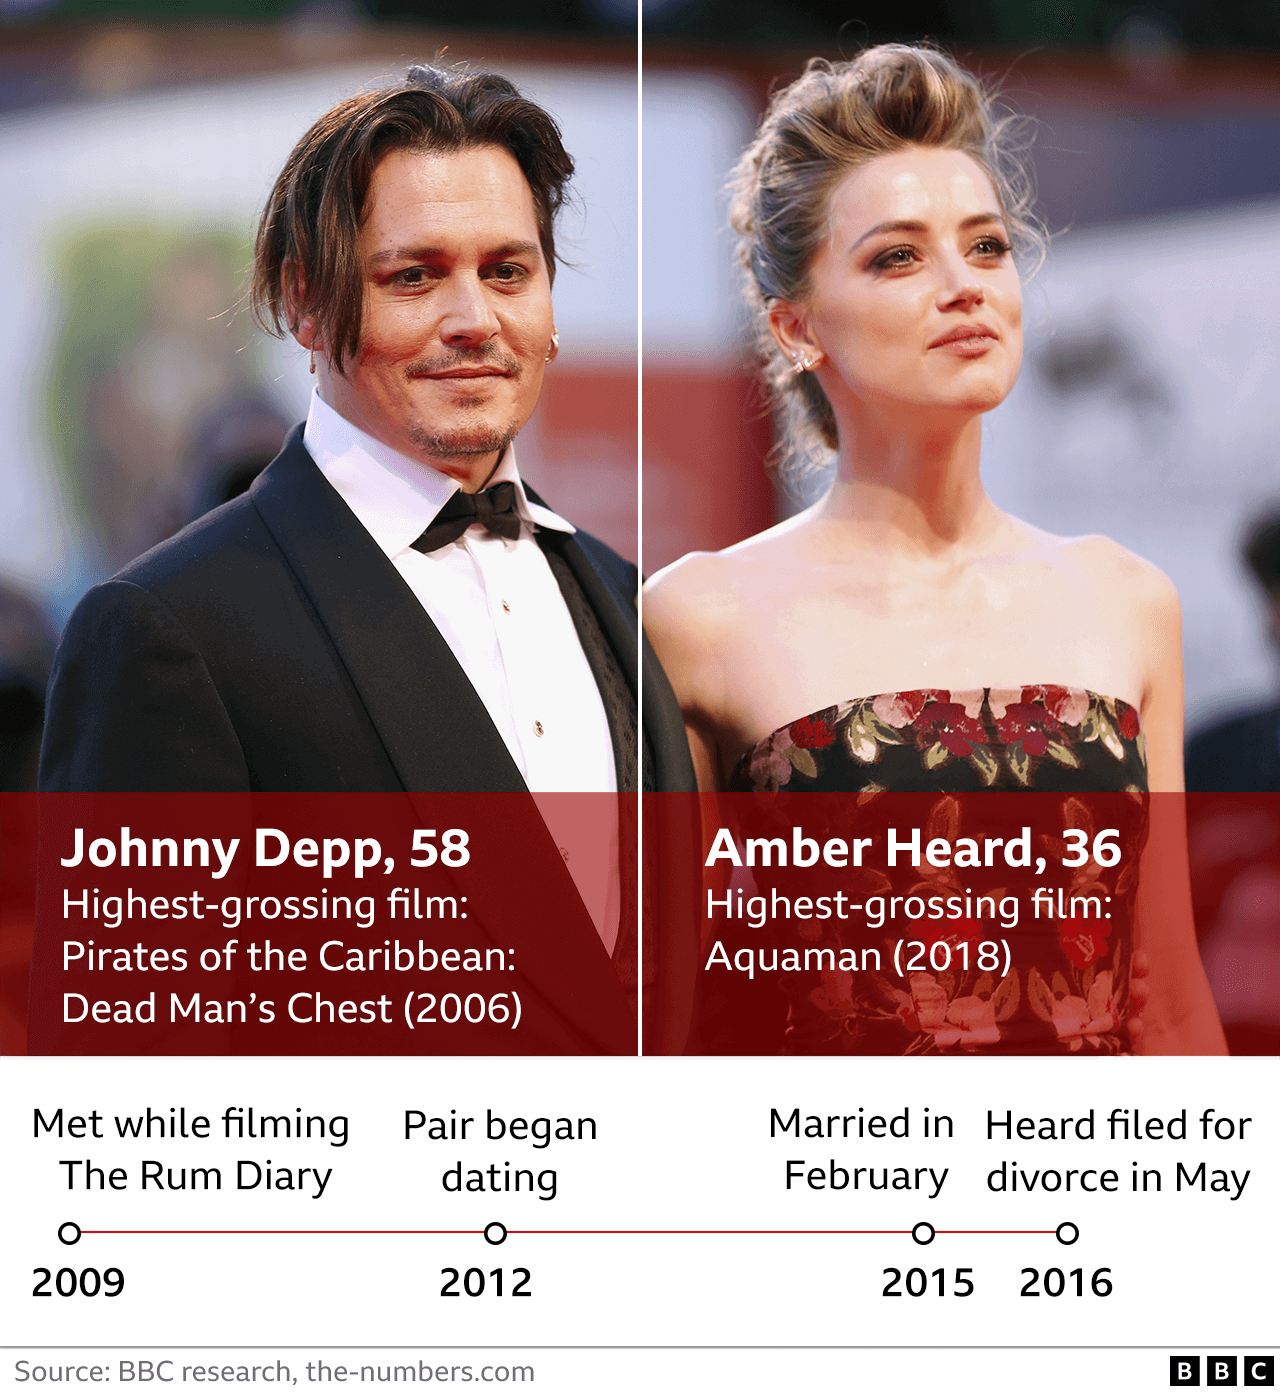 Graphic showing key facts about Depp and Heard